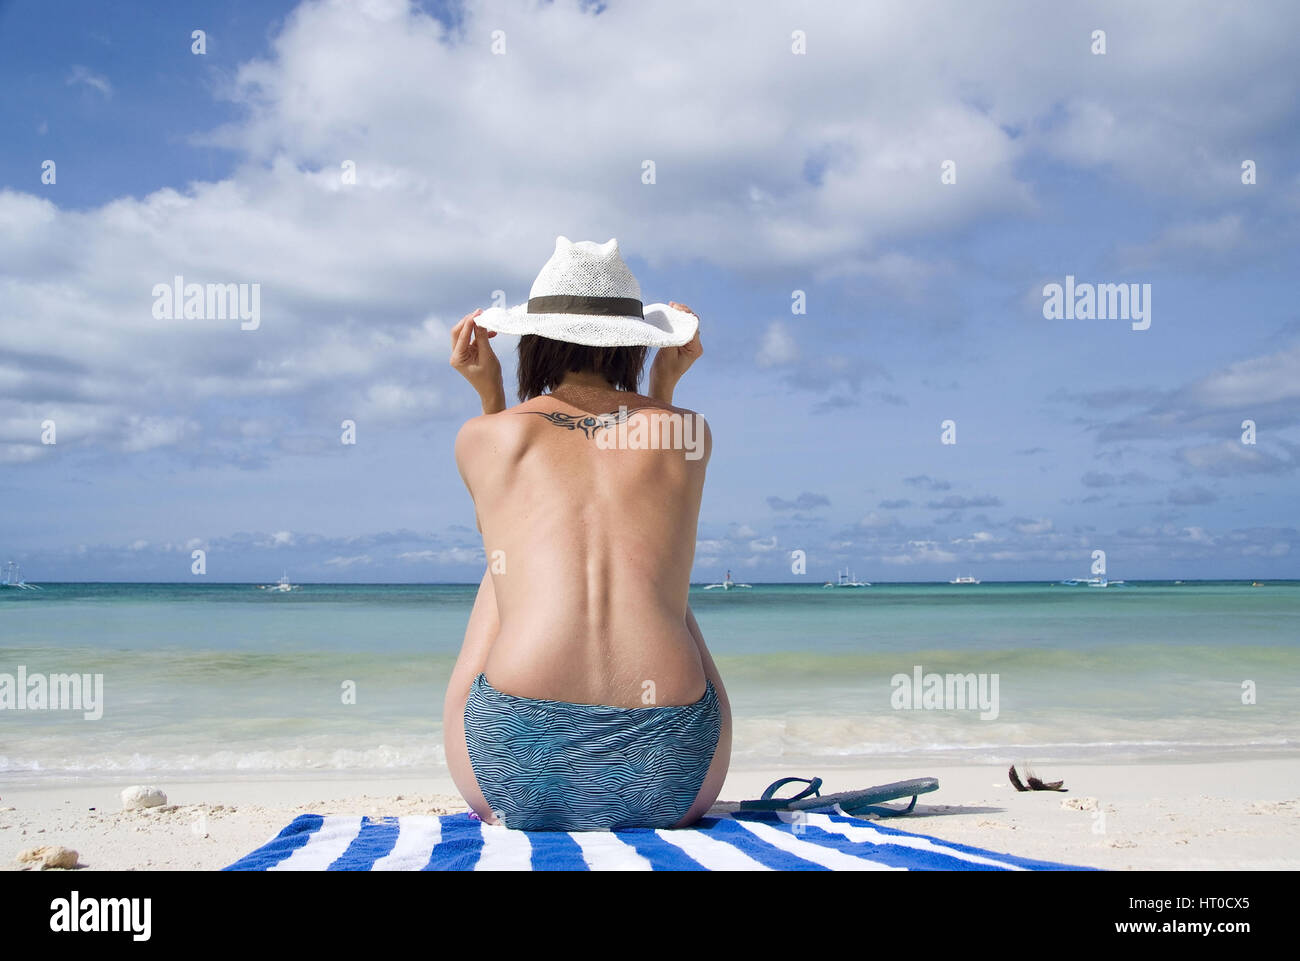 Junge Frau mit Sonnenhut am Strand - young woman on the beach Stock Photo